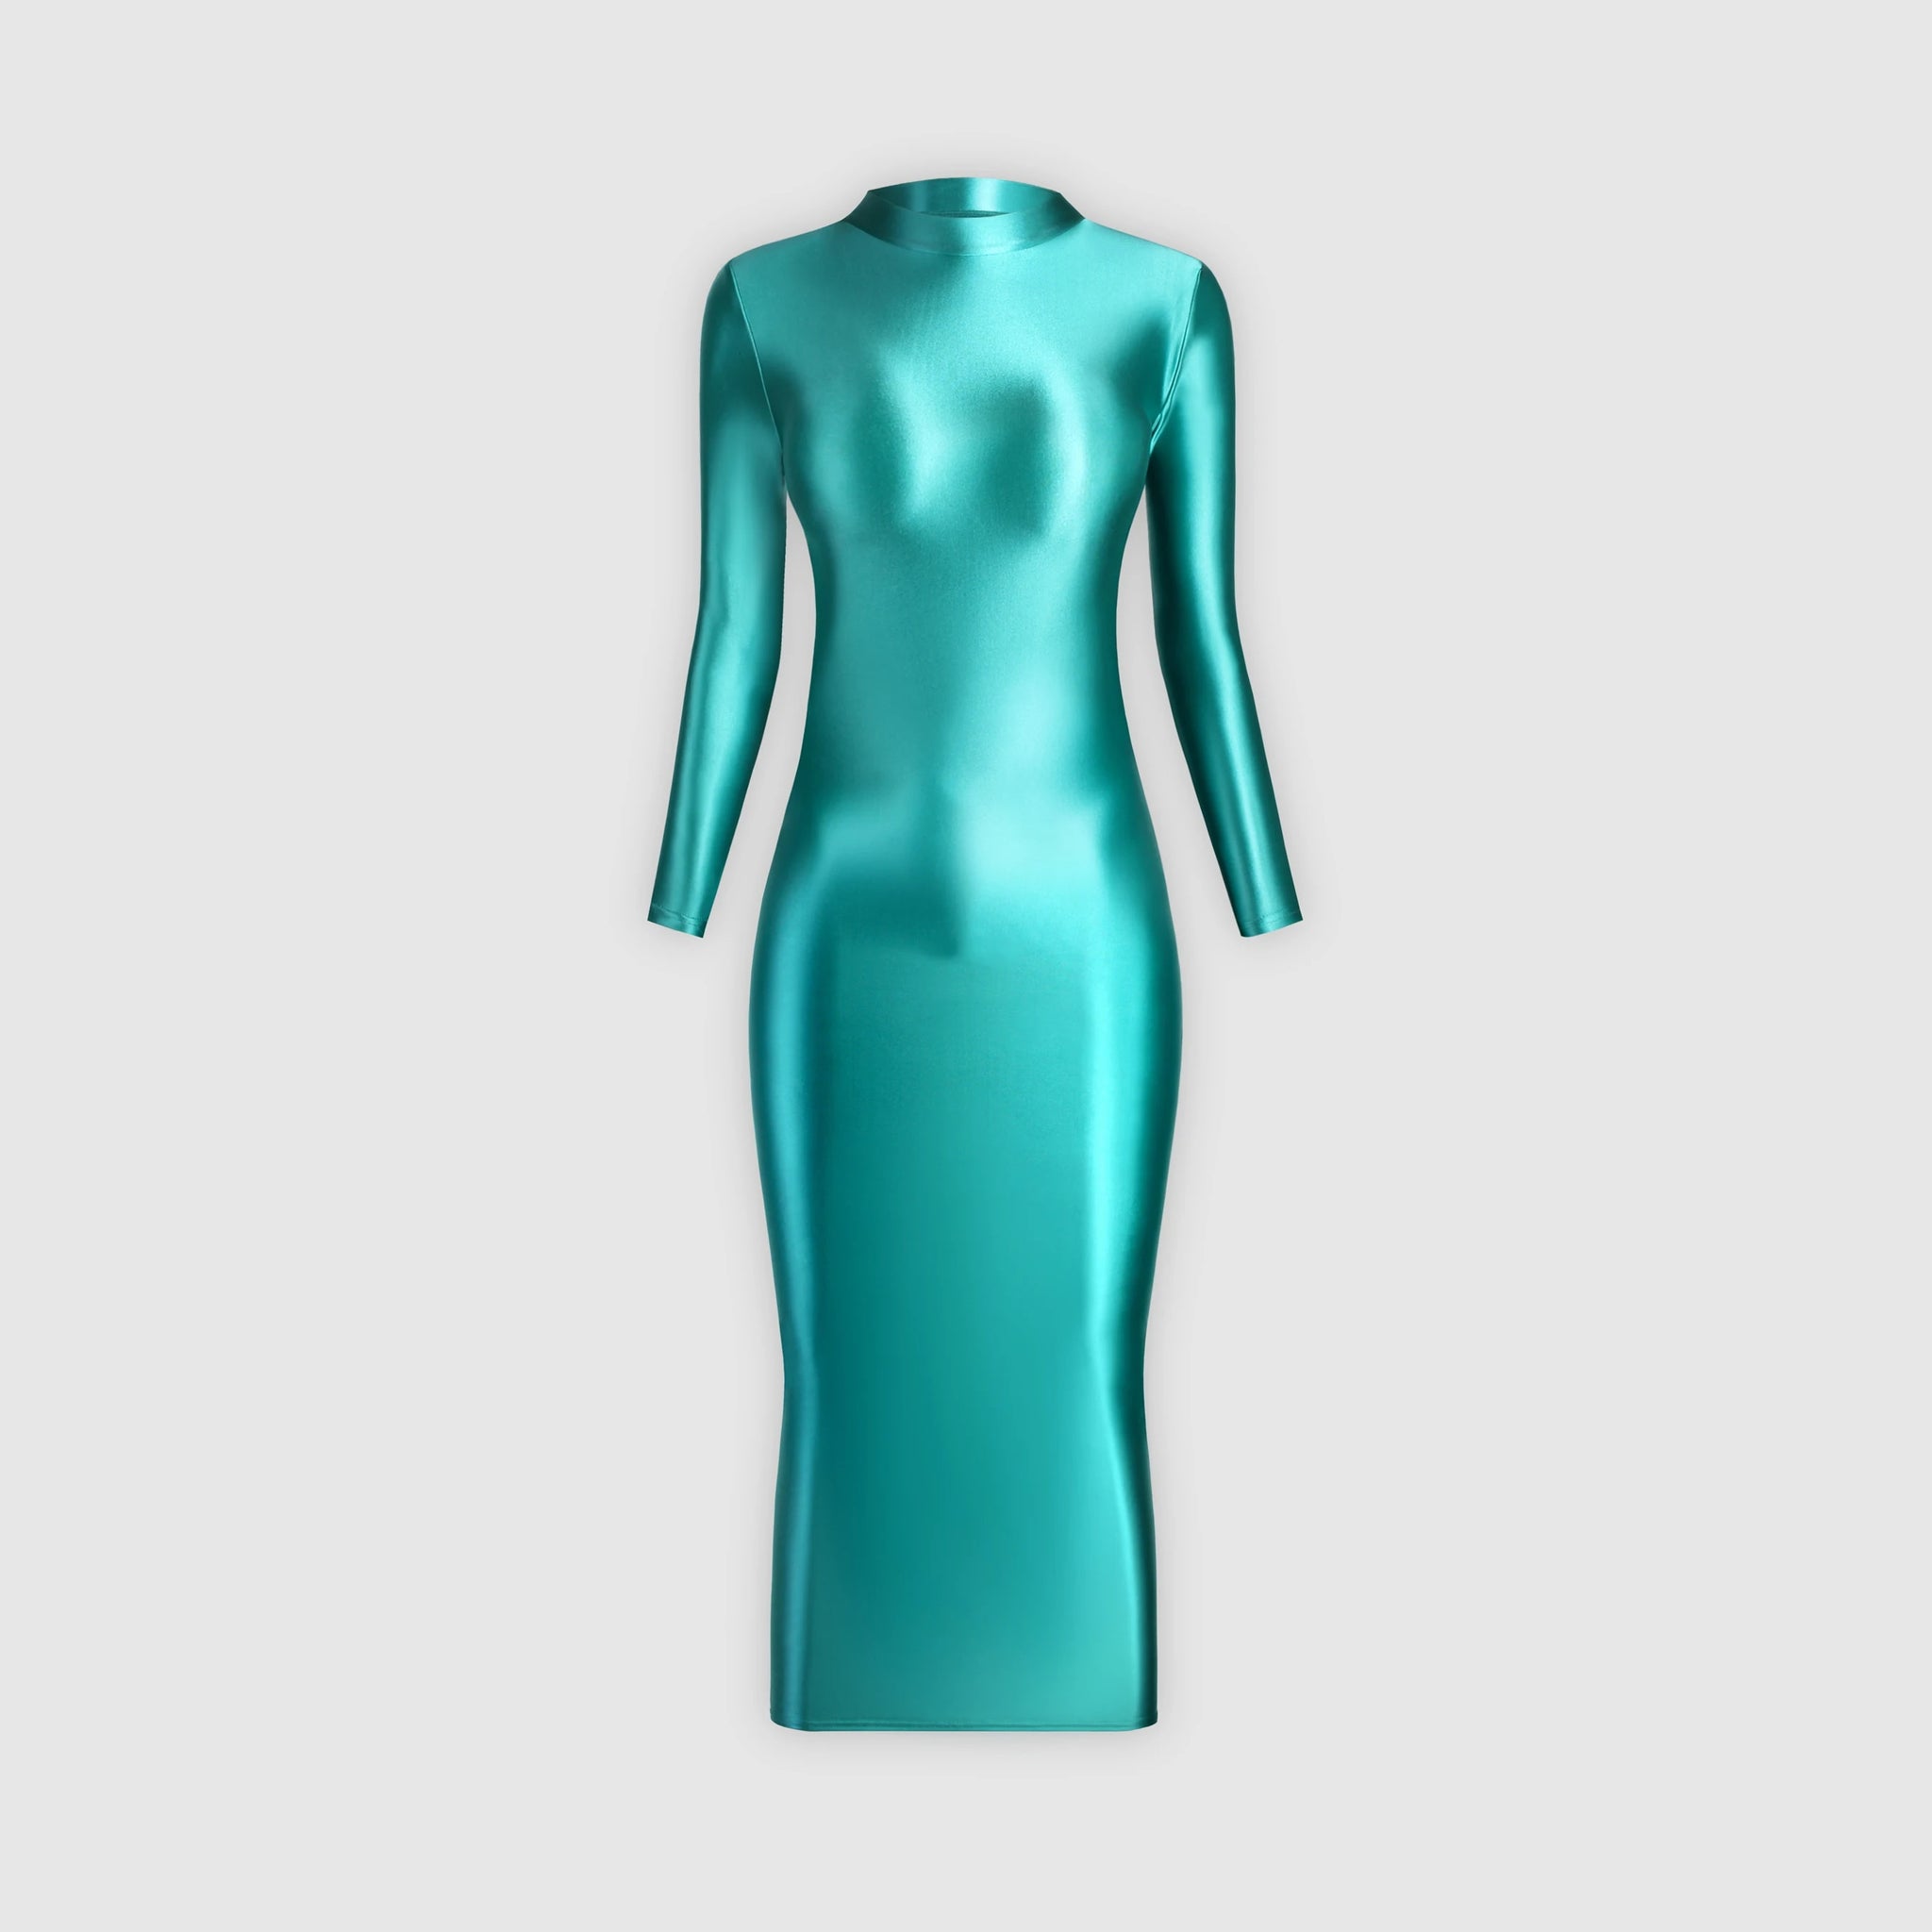 Elegant long-sleeve turquoise glossy dress, ideal for a special occasion.